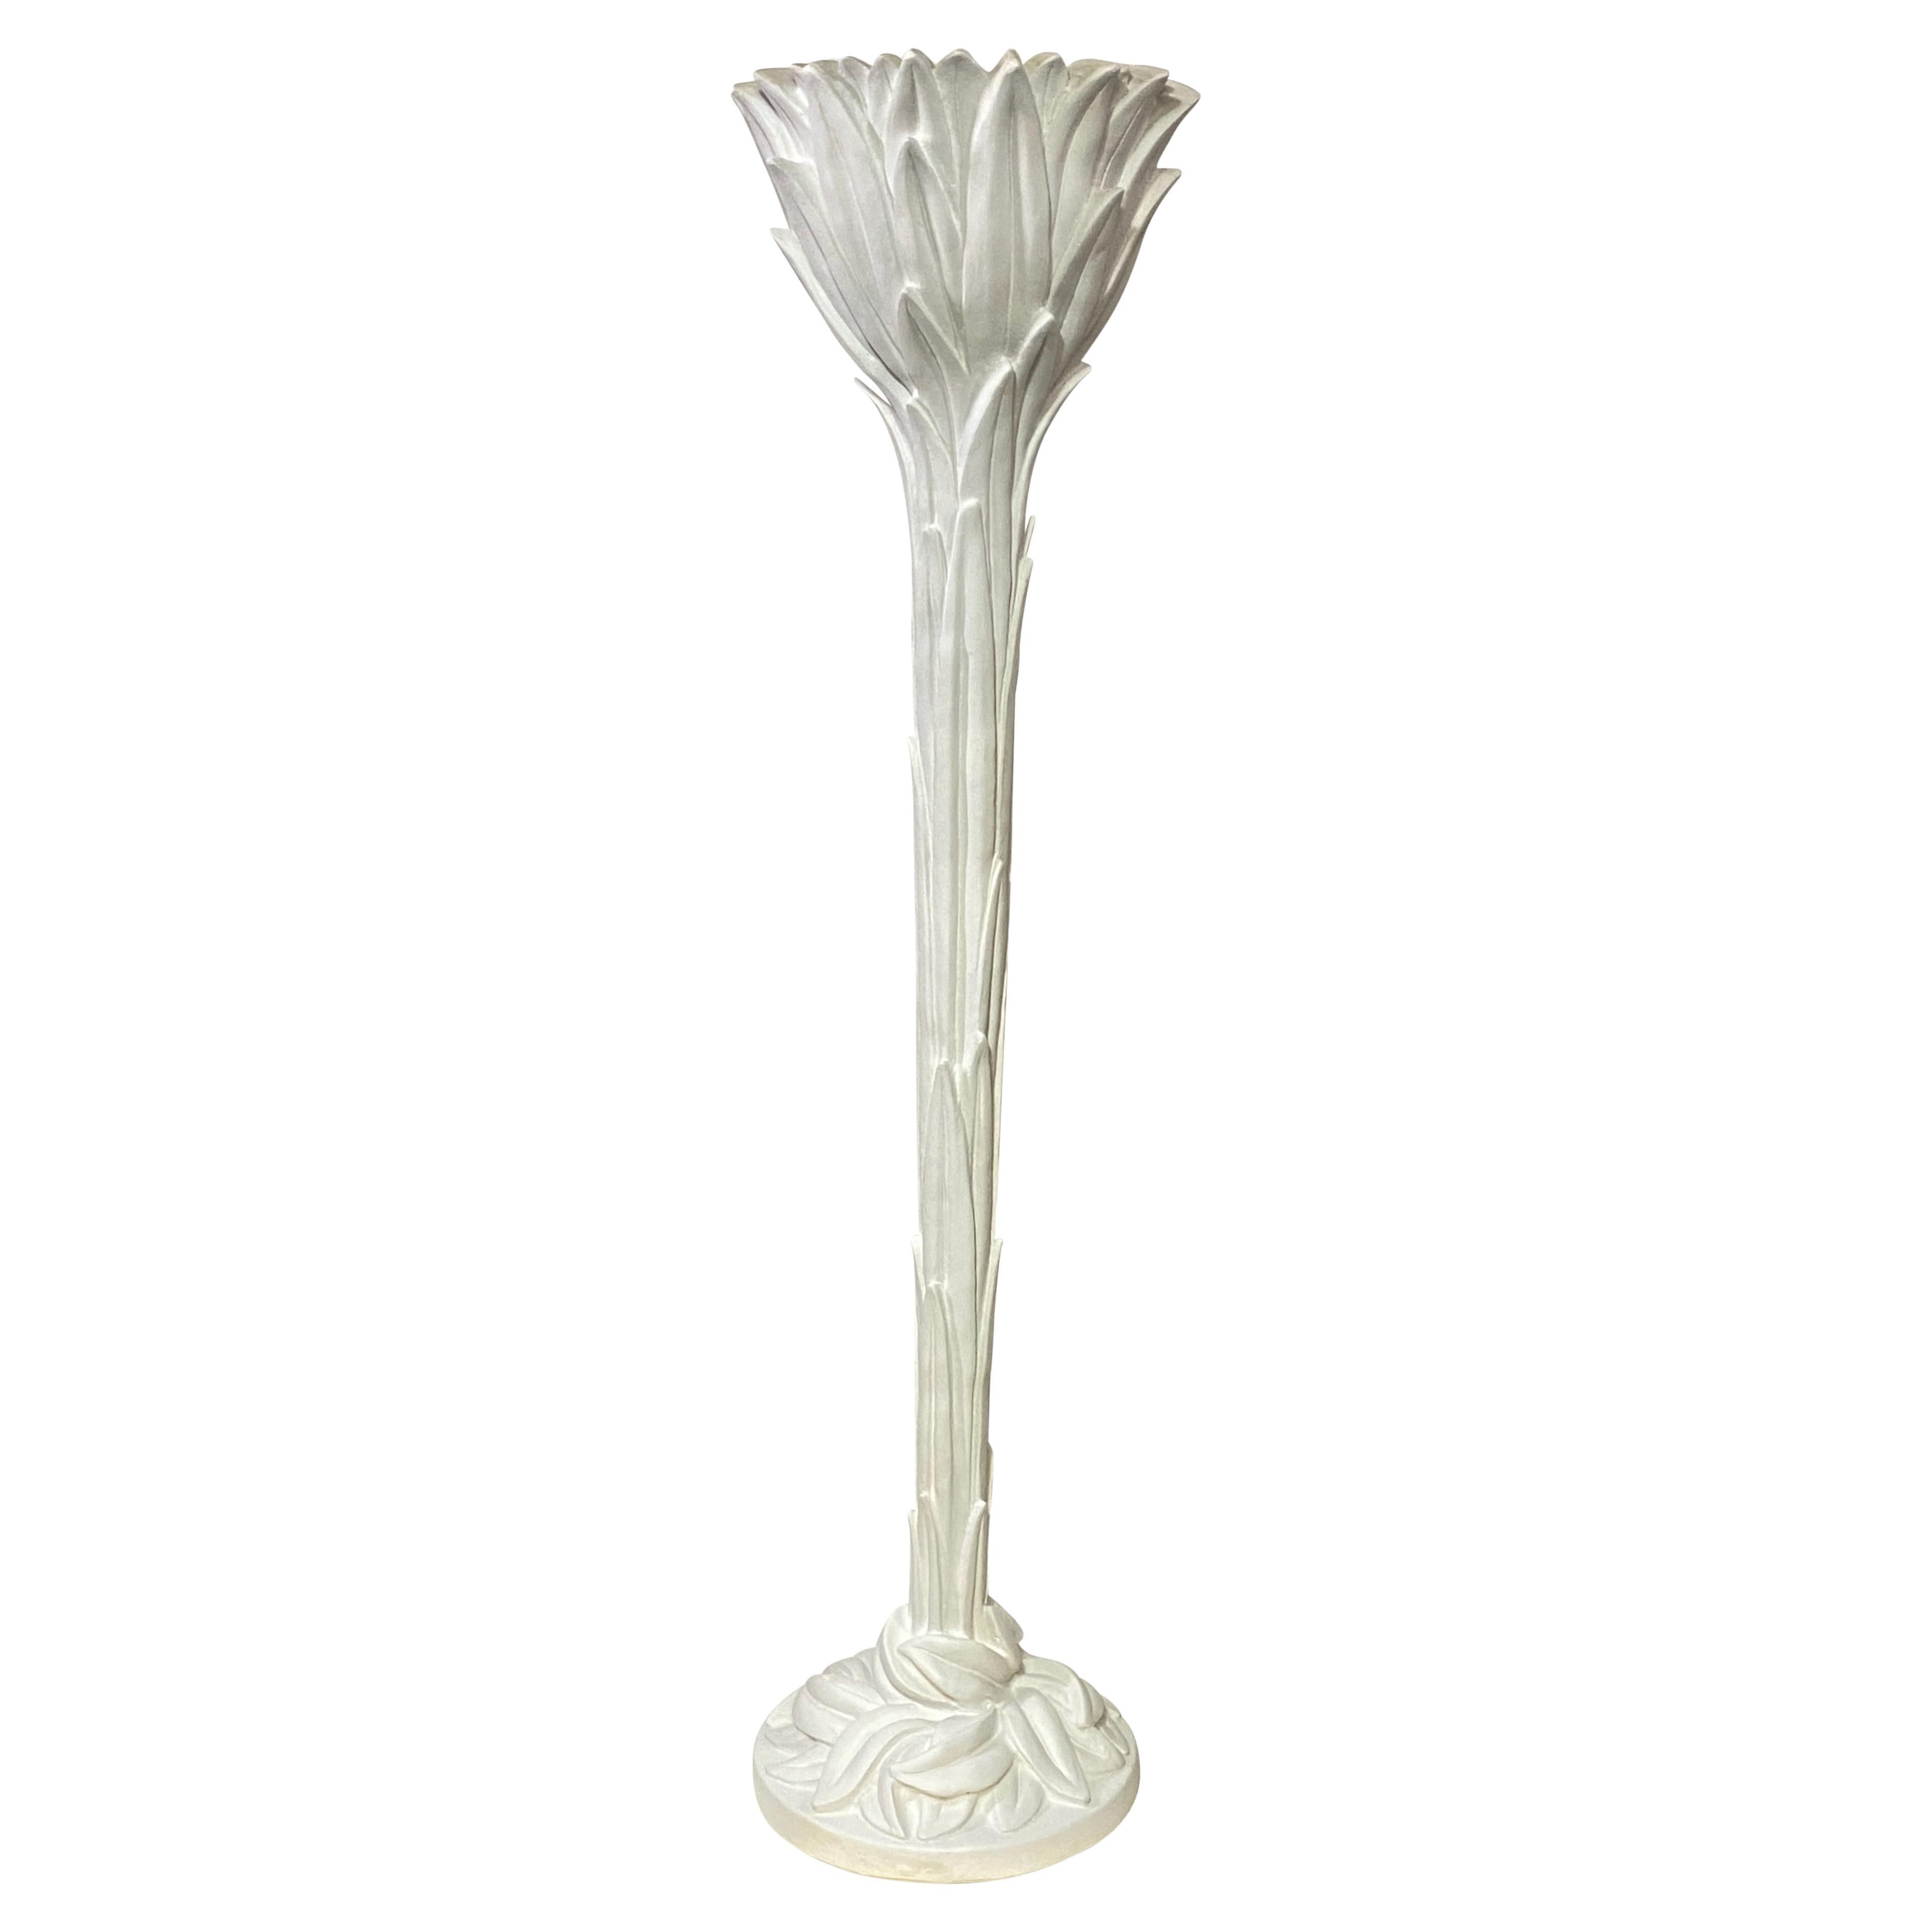 Vintage Palm Leaf Torchiere Floor Lamp in the manner of Serge Roche, Circa 1960 For Sale